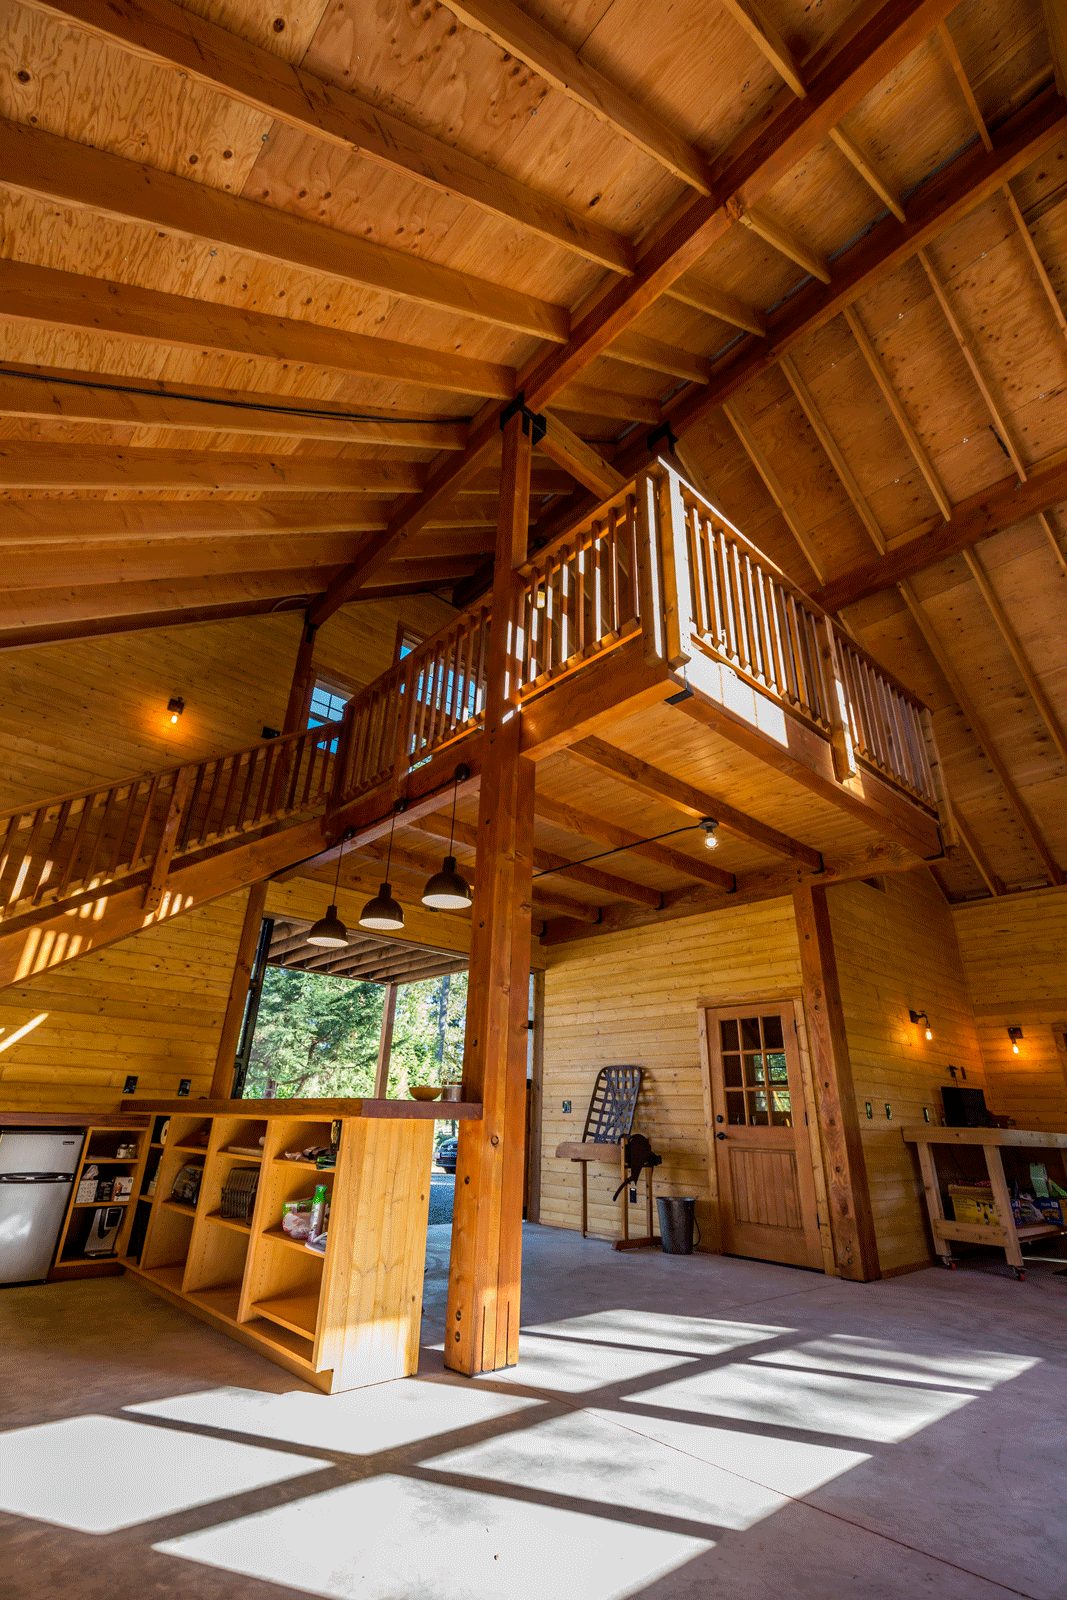 DC Builders specializes in timber framed party barn construction.